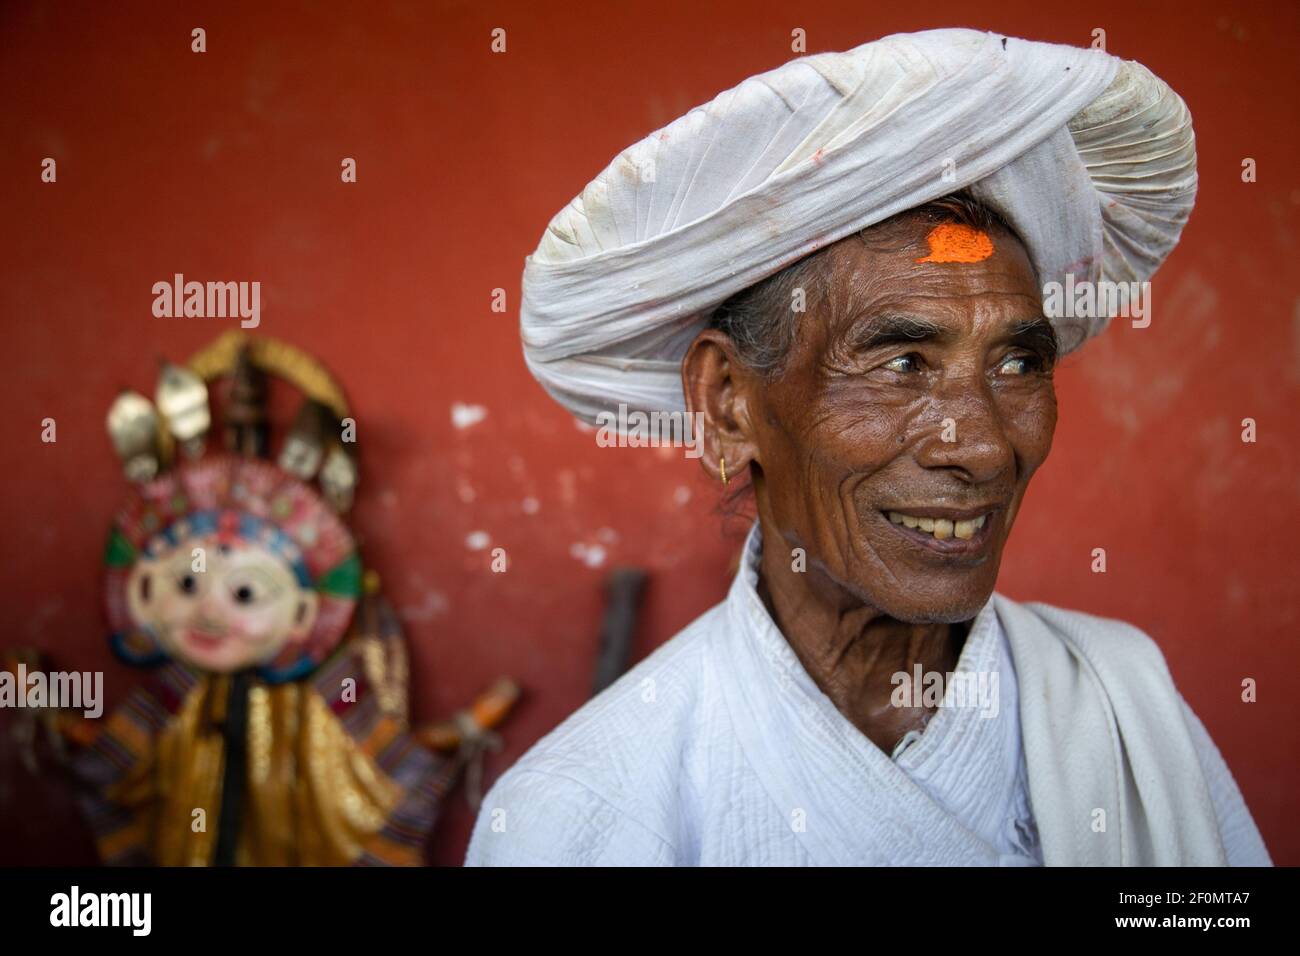 Priest in traditional attire during a deity's procession as part of the Shikali festival at Khokana village in Lalitpur, Nepal on October 4 2019. In this festival devotees worship people wearing traditional dresses with colorful clay masks. after they dance villagers sacrificed animals and prayers in hope of gaining blessing from the deities in the annual Shikali festival. (Photo by Prabin Ranabhat/Pacific Press/Sipa USA) Stock Photo